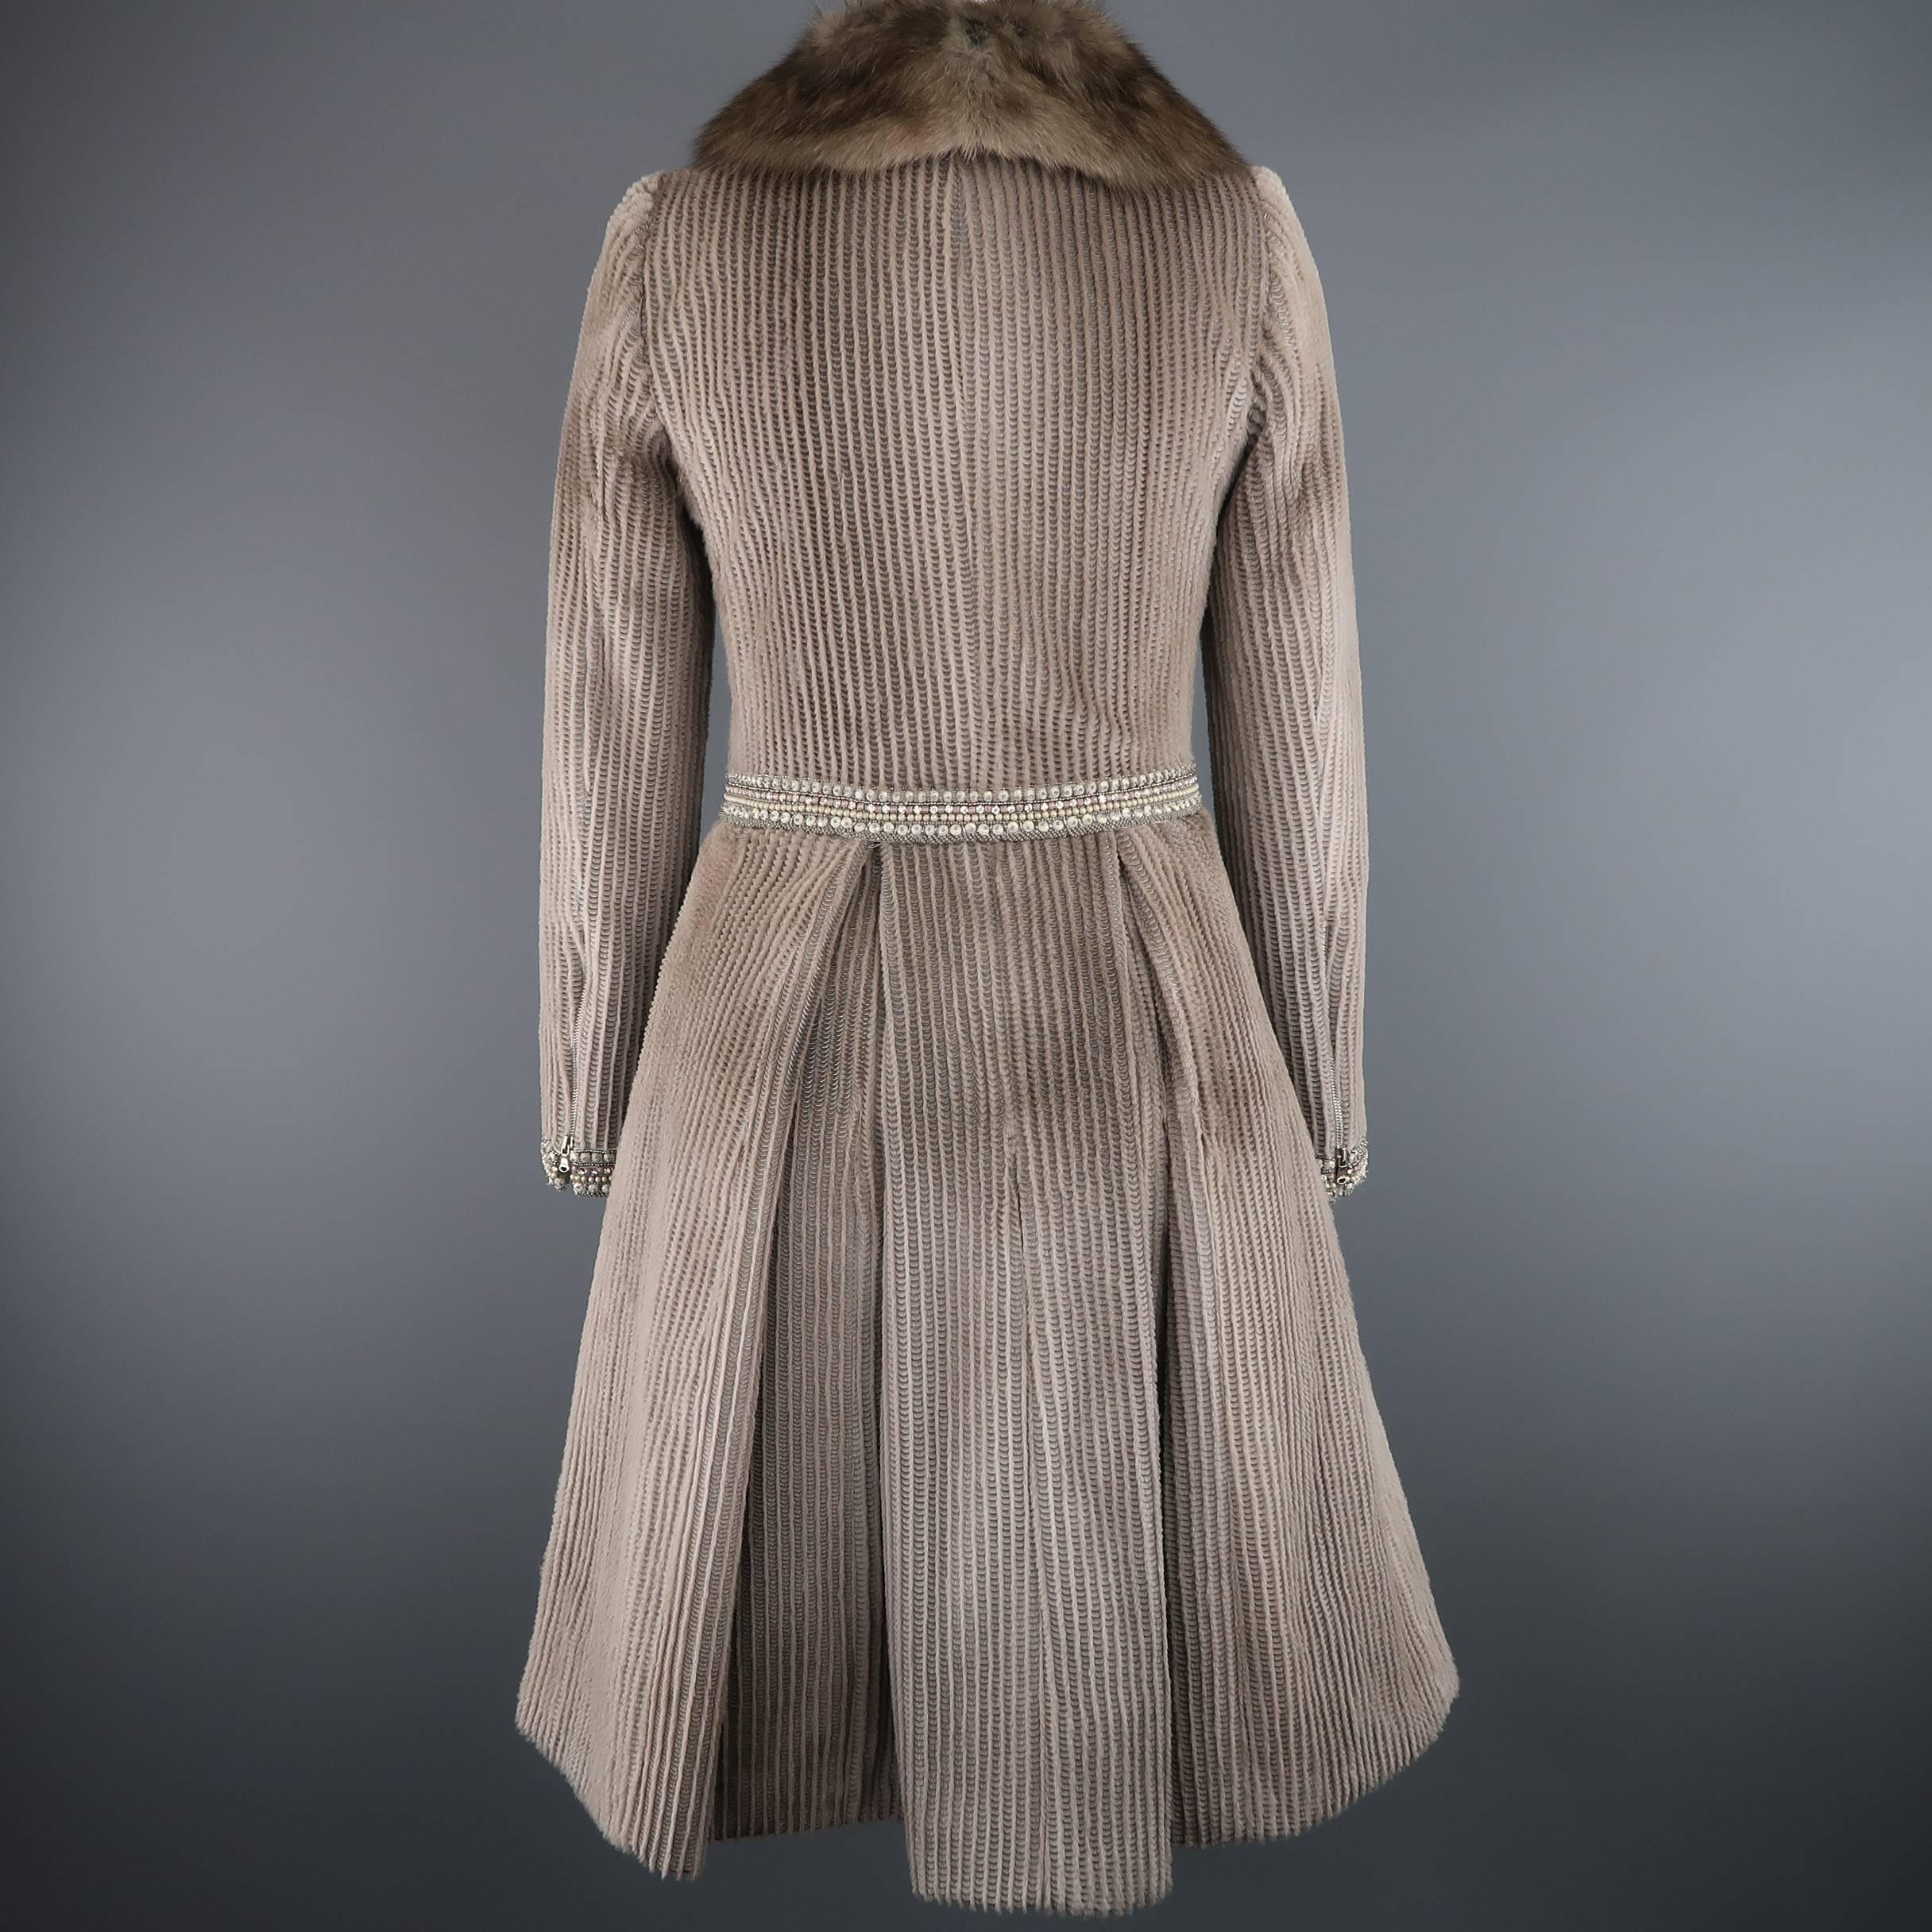 Dennis Basso Taupe Perforated Mink Sable Collar Pleated Skirt Cocktail Dress 4